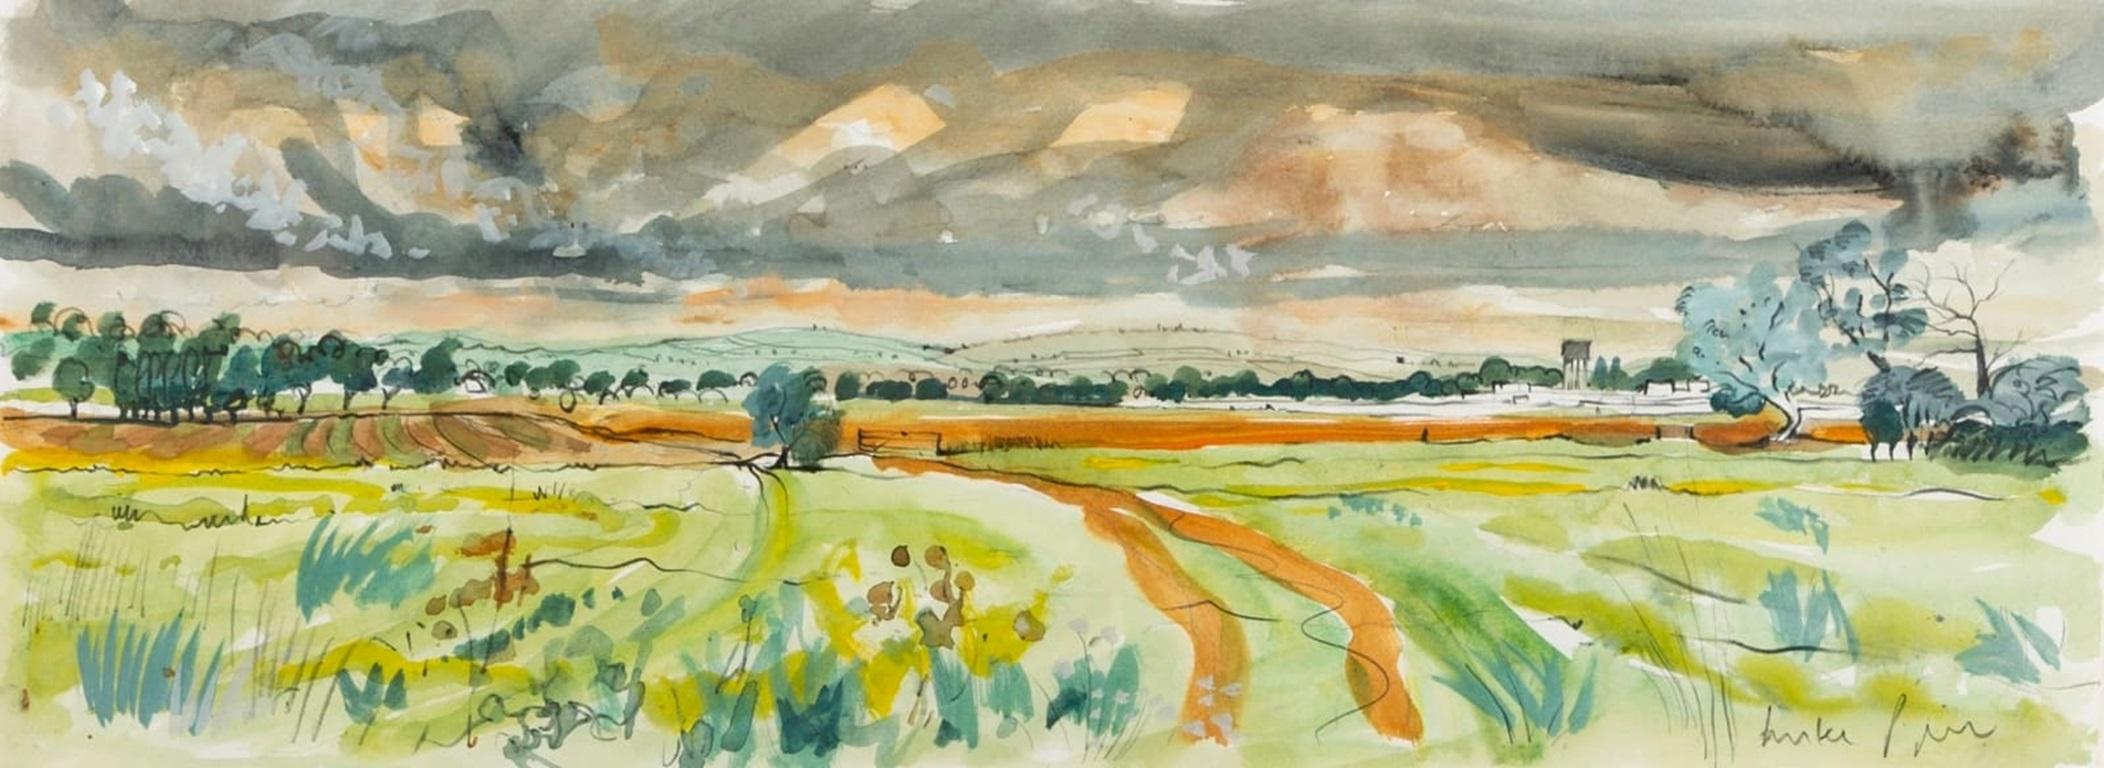 Unknown Landscape Painting - View South from Sharpham Common, Near Glastonbury Painting by Luke Piper, 2020